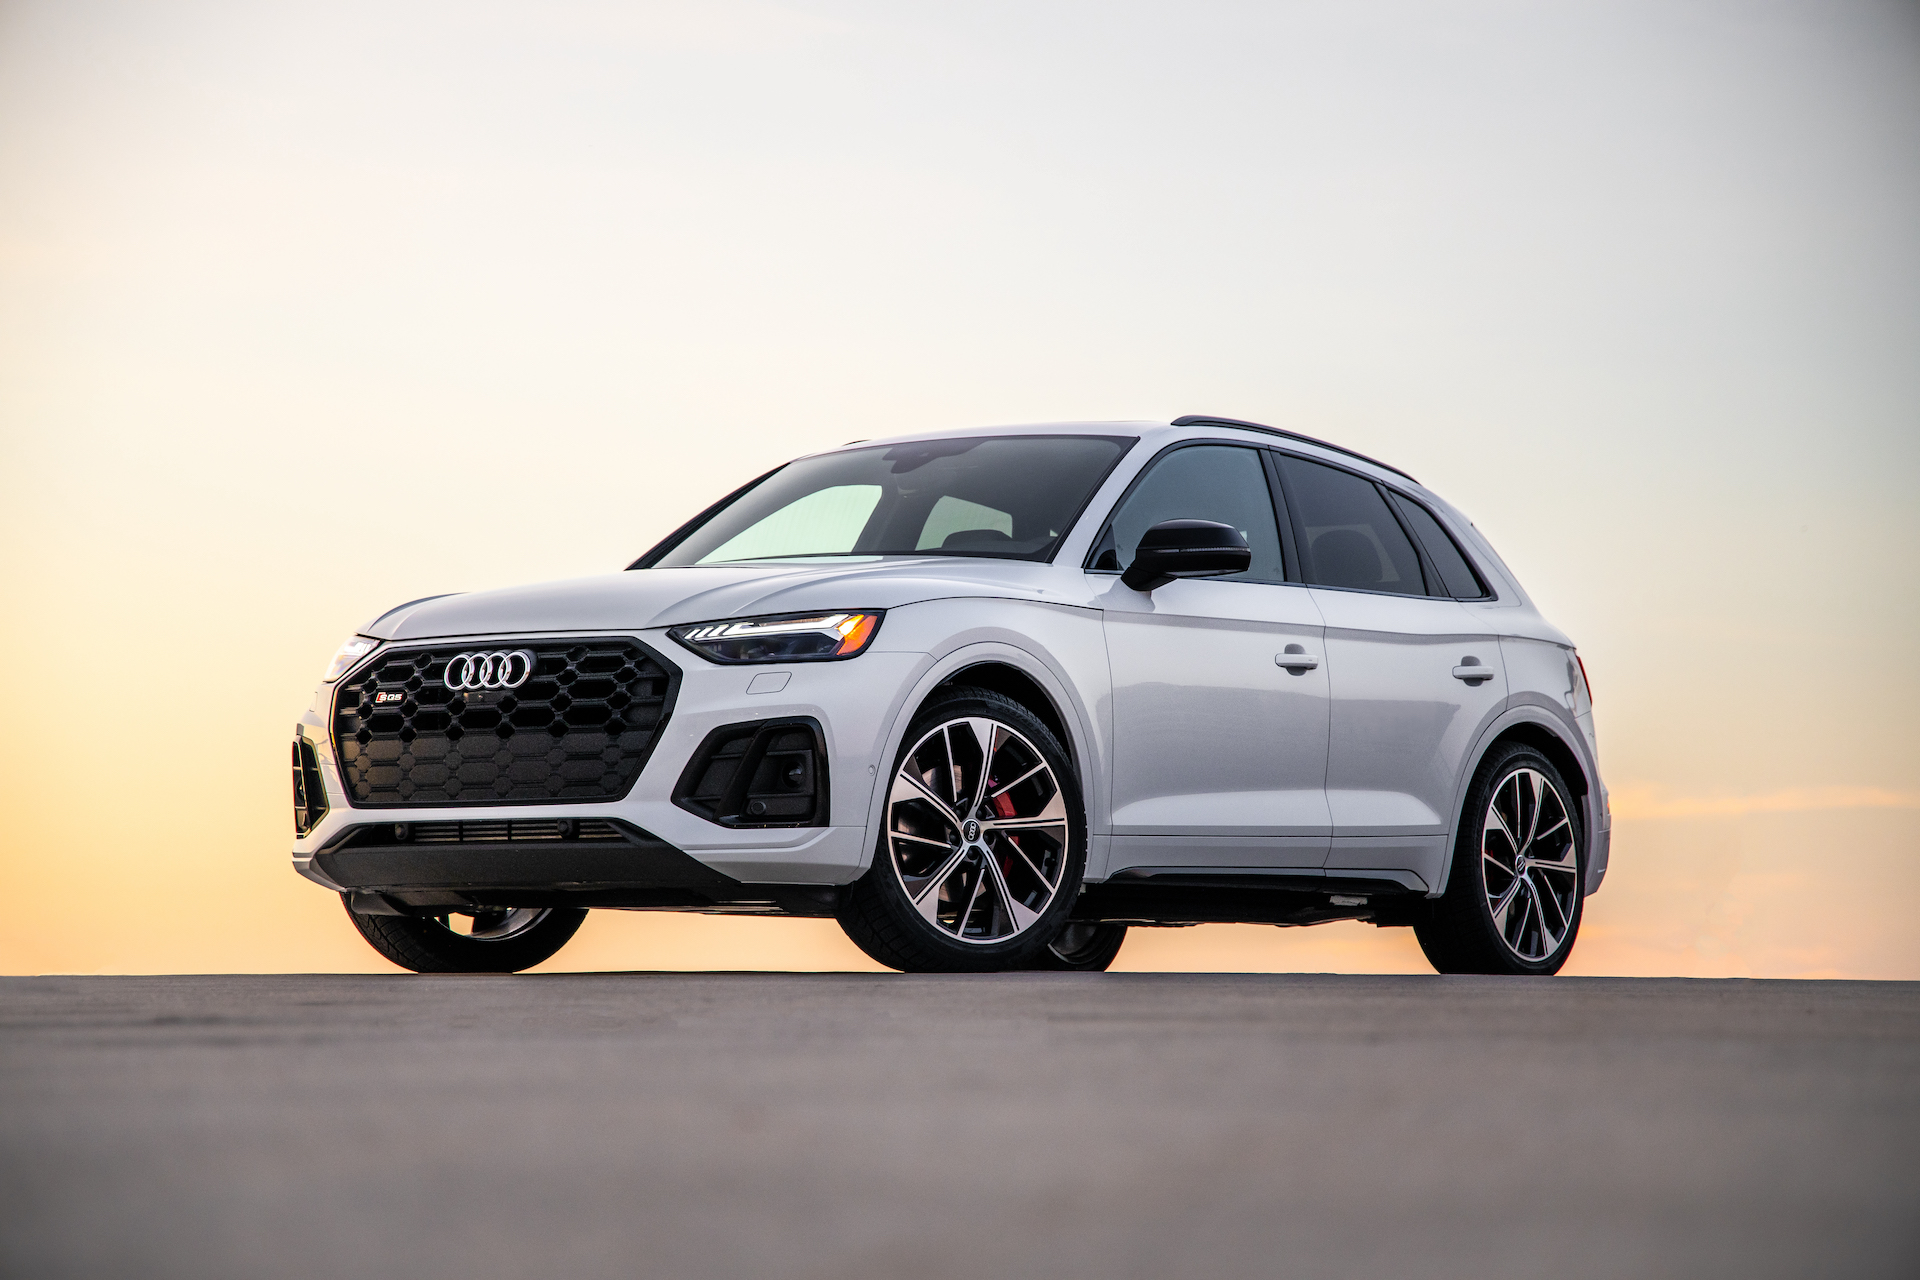 2022 Audi Q5 prices and expert review - The Car Connection